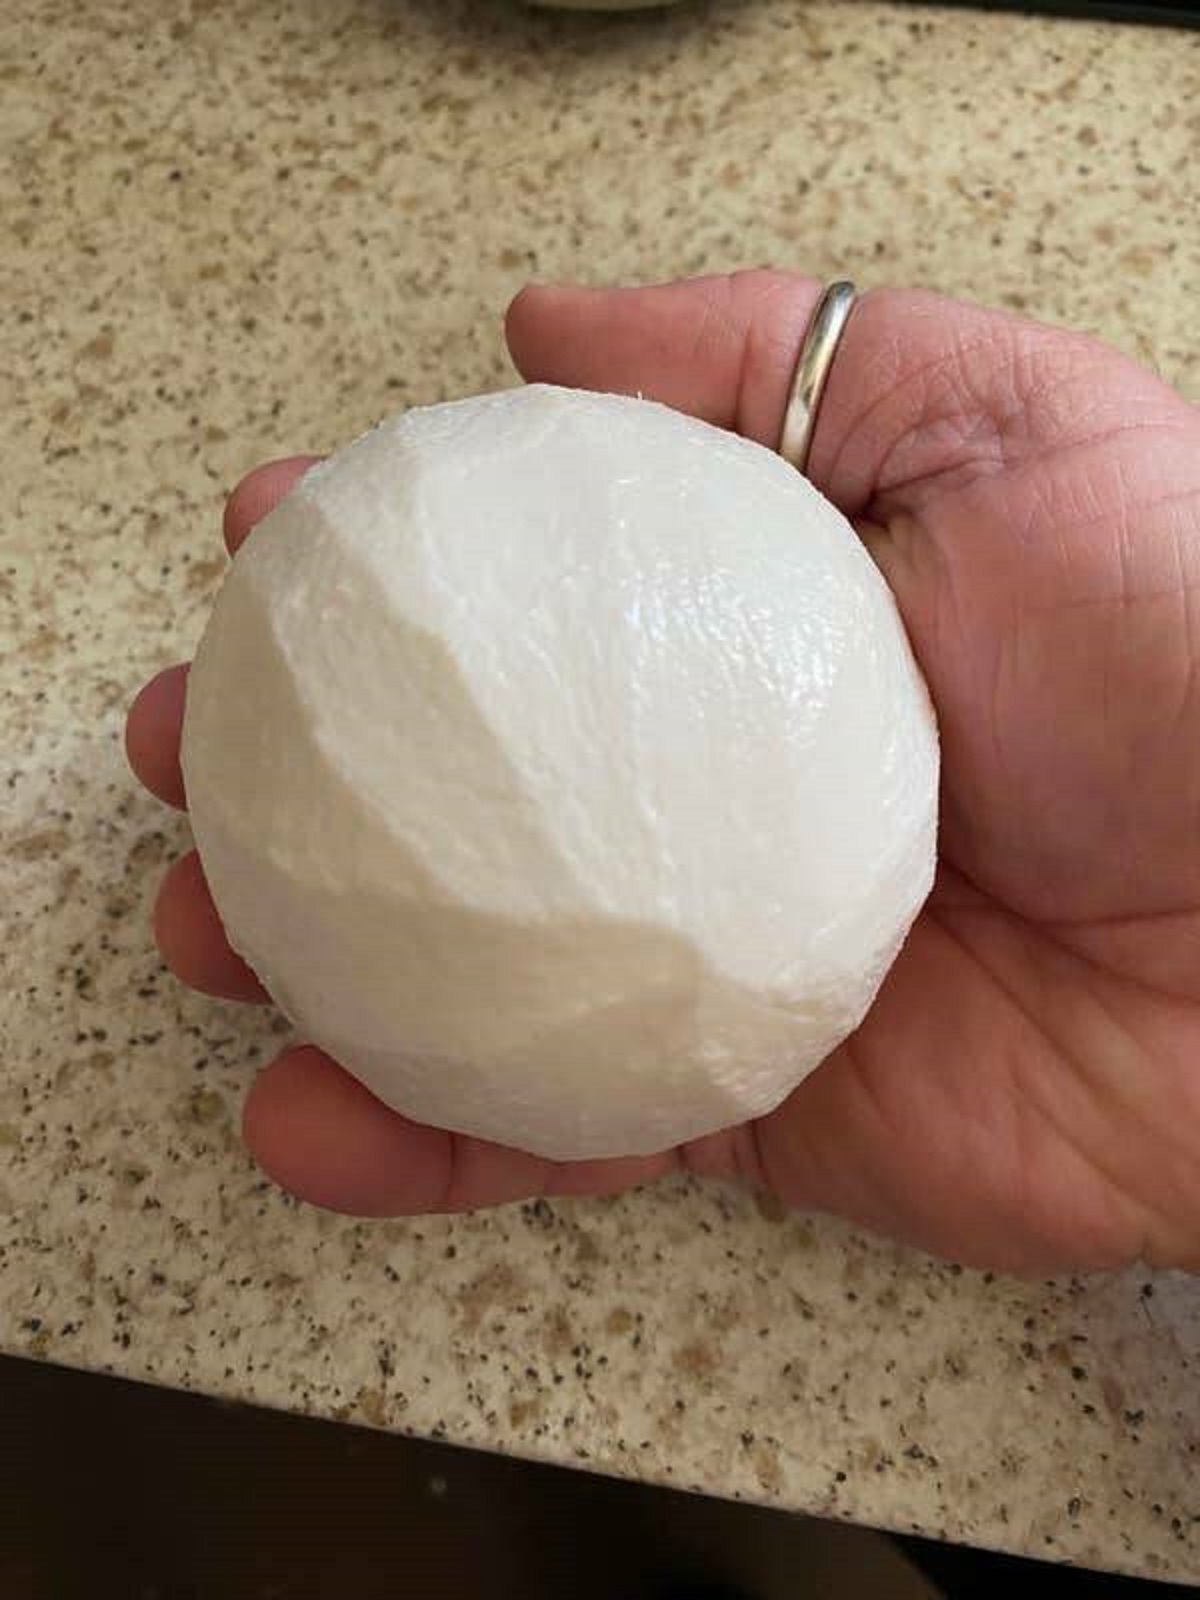 This is what a peeled coconut looks like: